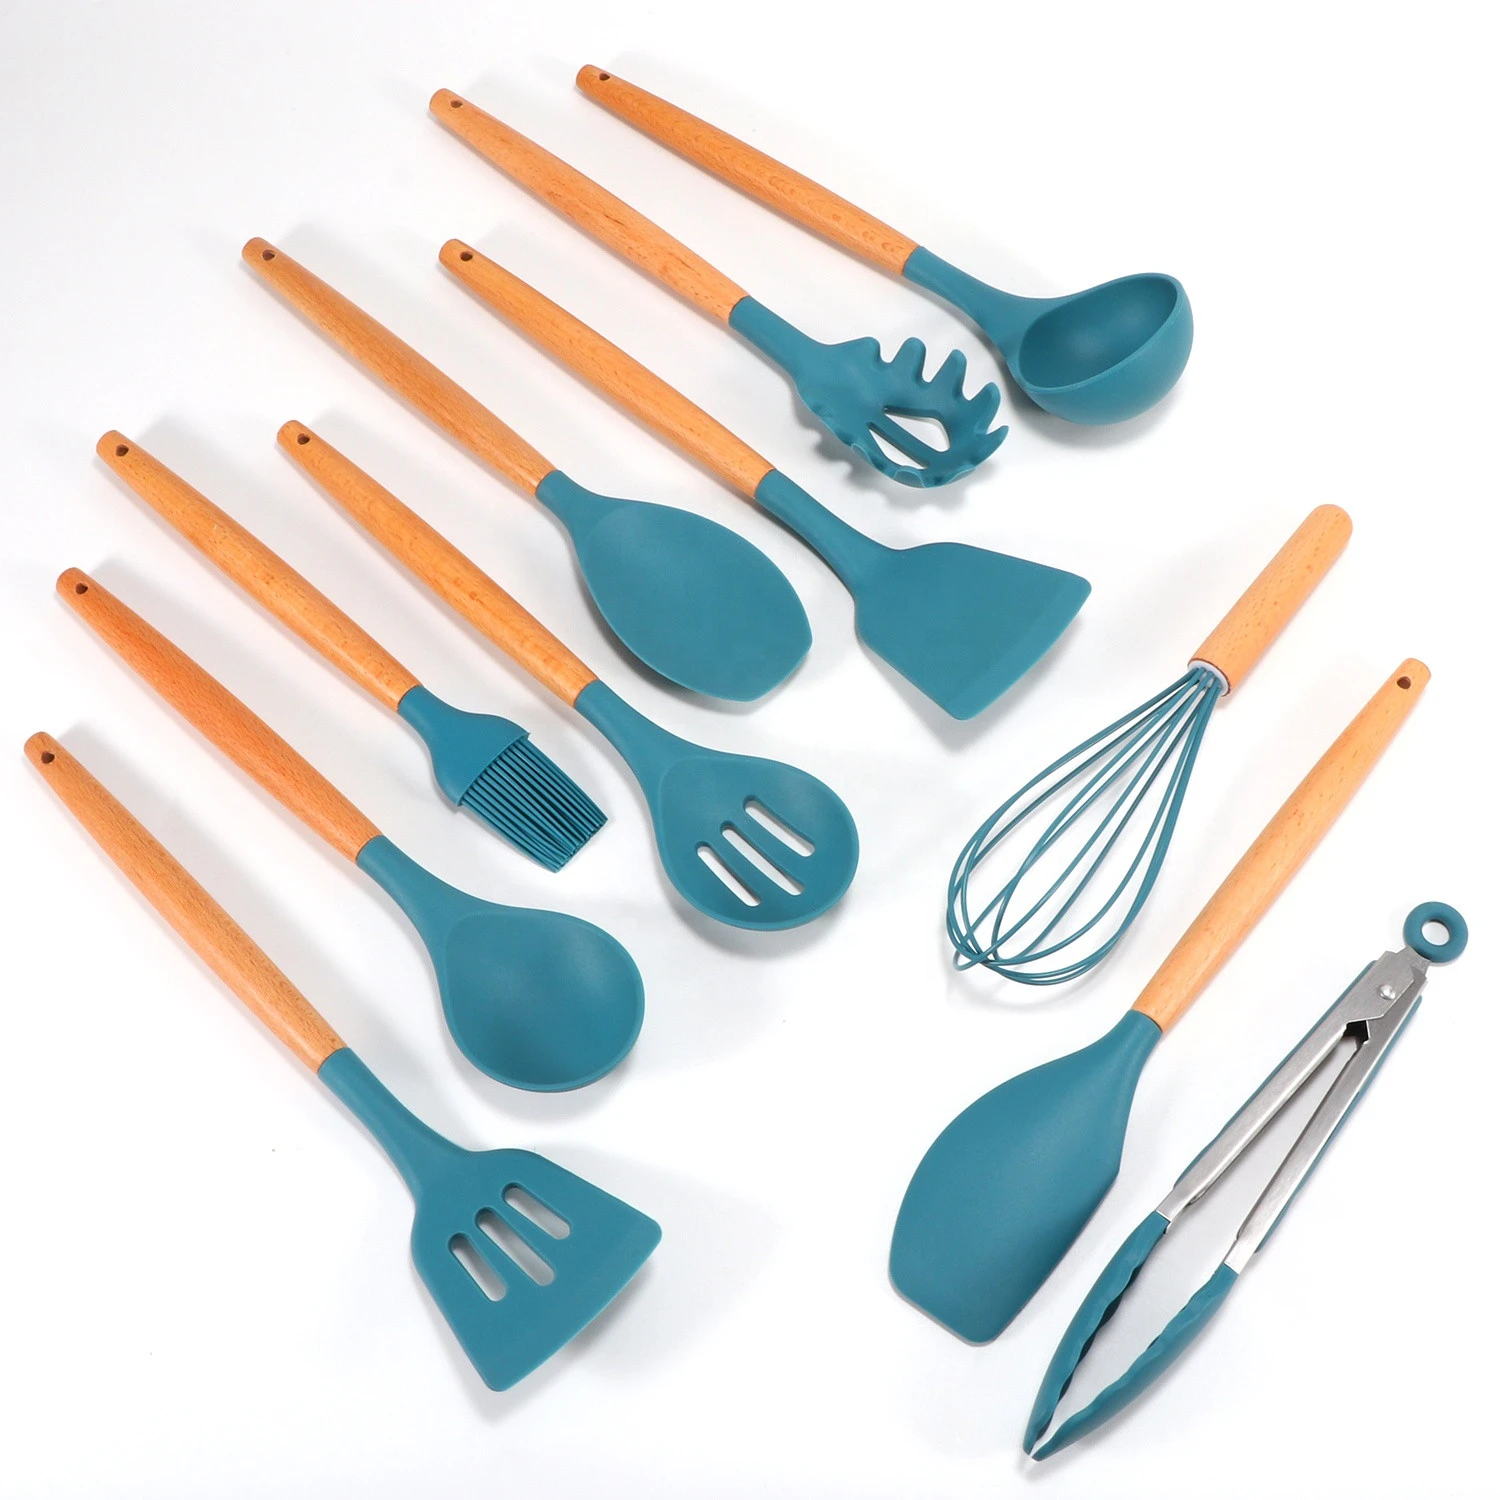 Compostable non stick reusable household cook tool silicone kitchen utensils set kitchen items